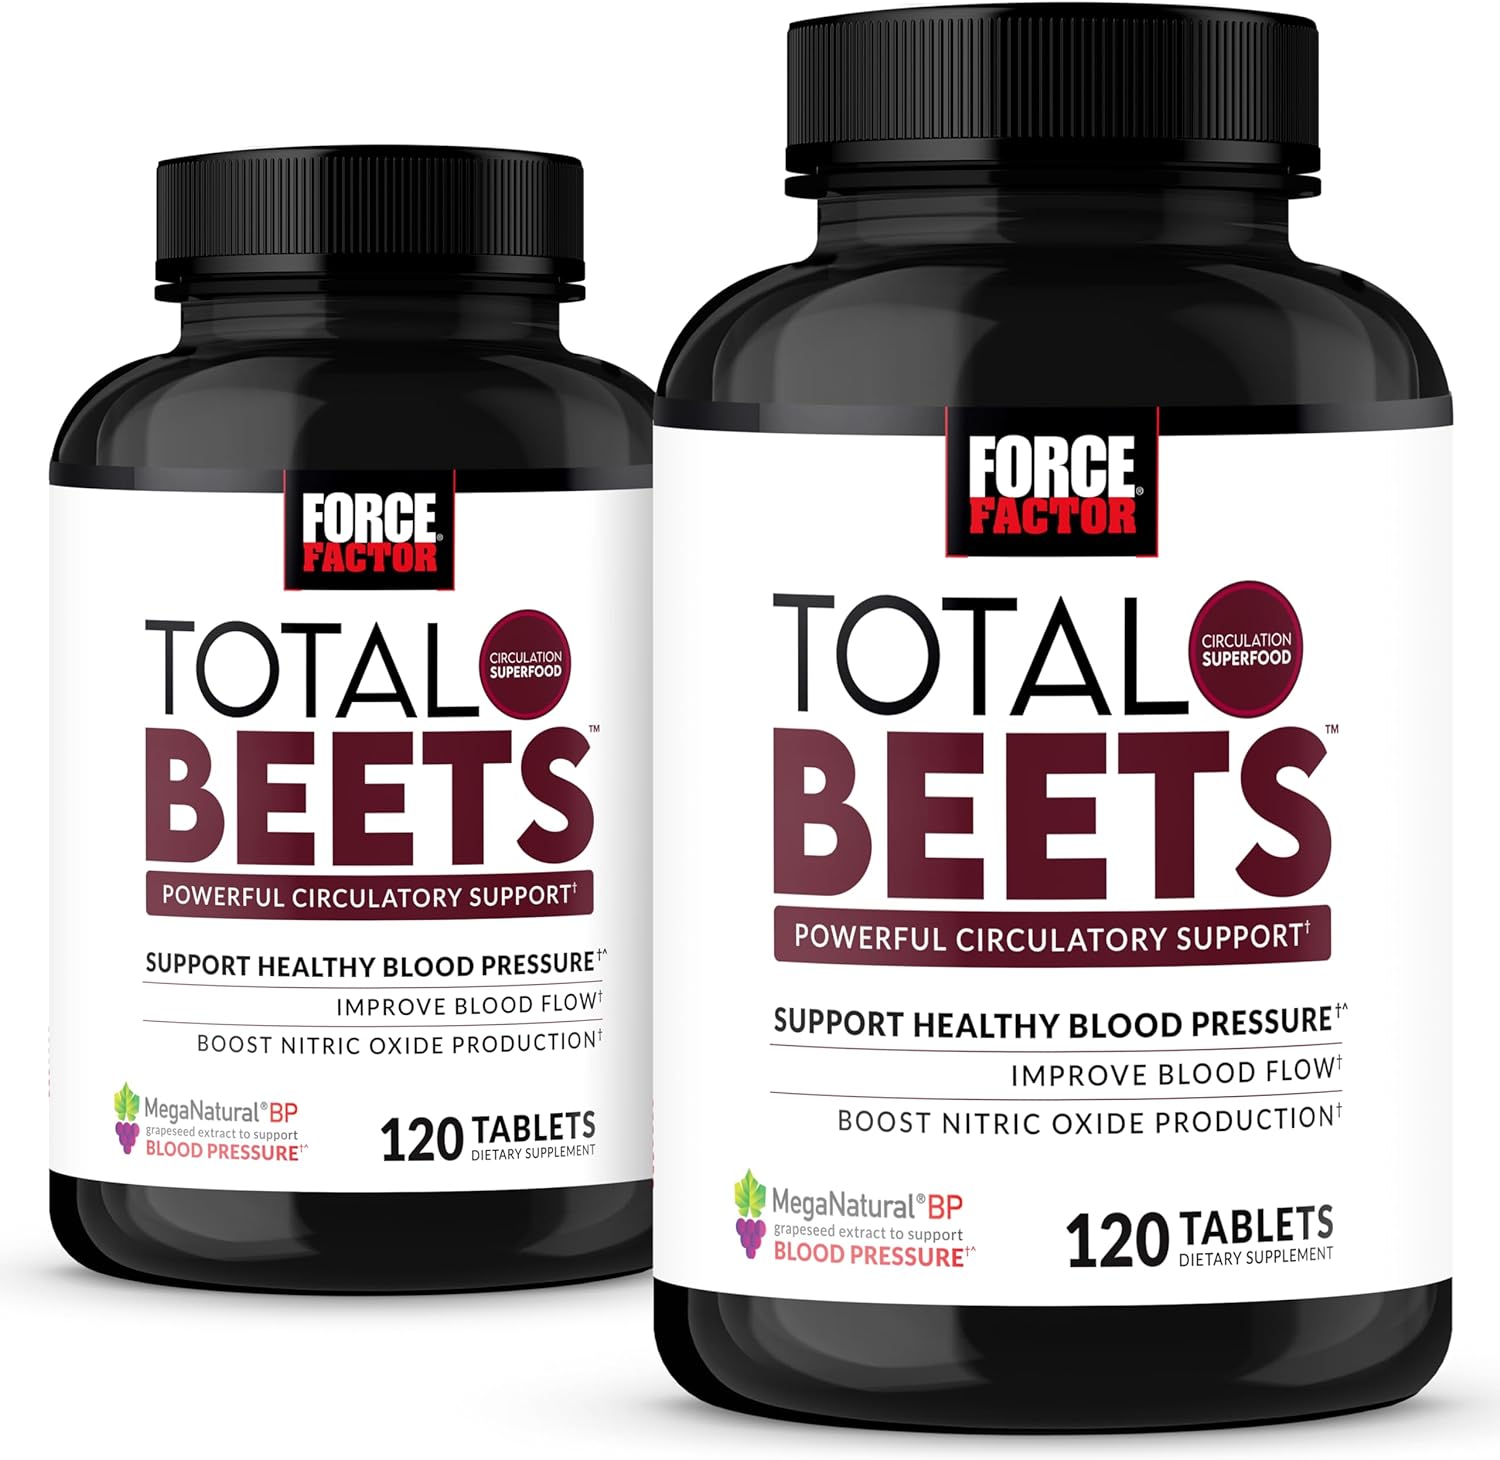 Force Factor Total Beets Nitric Oxide Supplement with Beet Root Powder, Nitrates, Grapeseed Extract for Circulation, Cardiovascular, Heart Health, 240 Tablets, 2 Pack